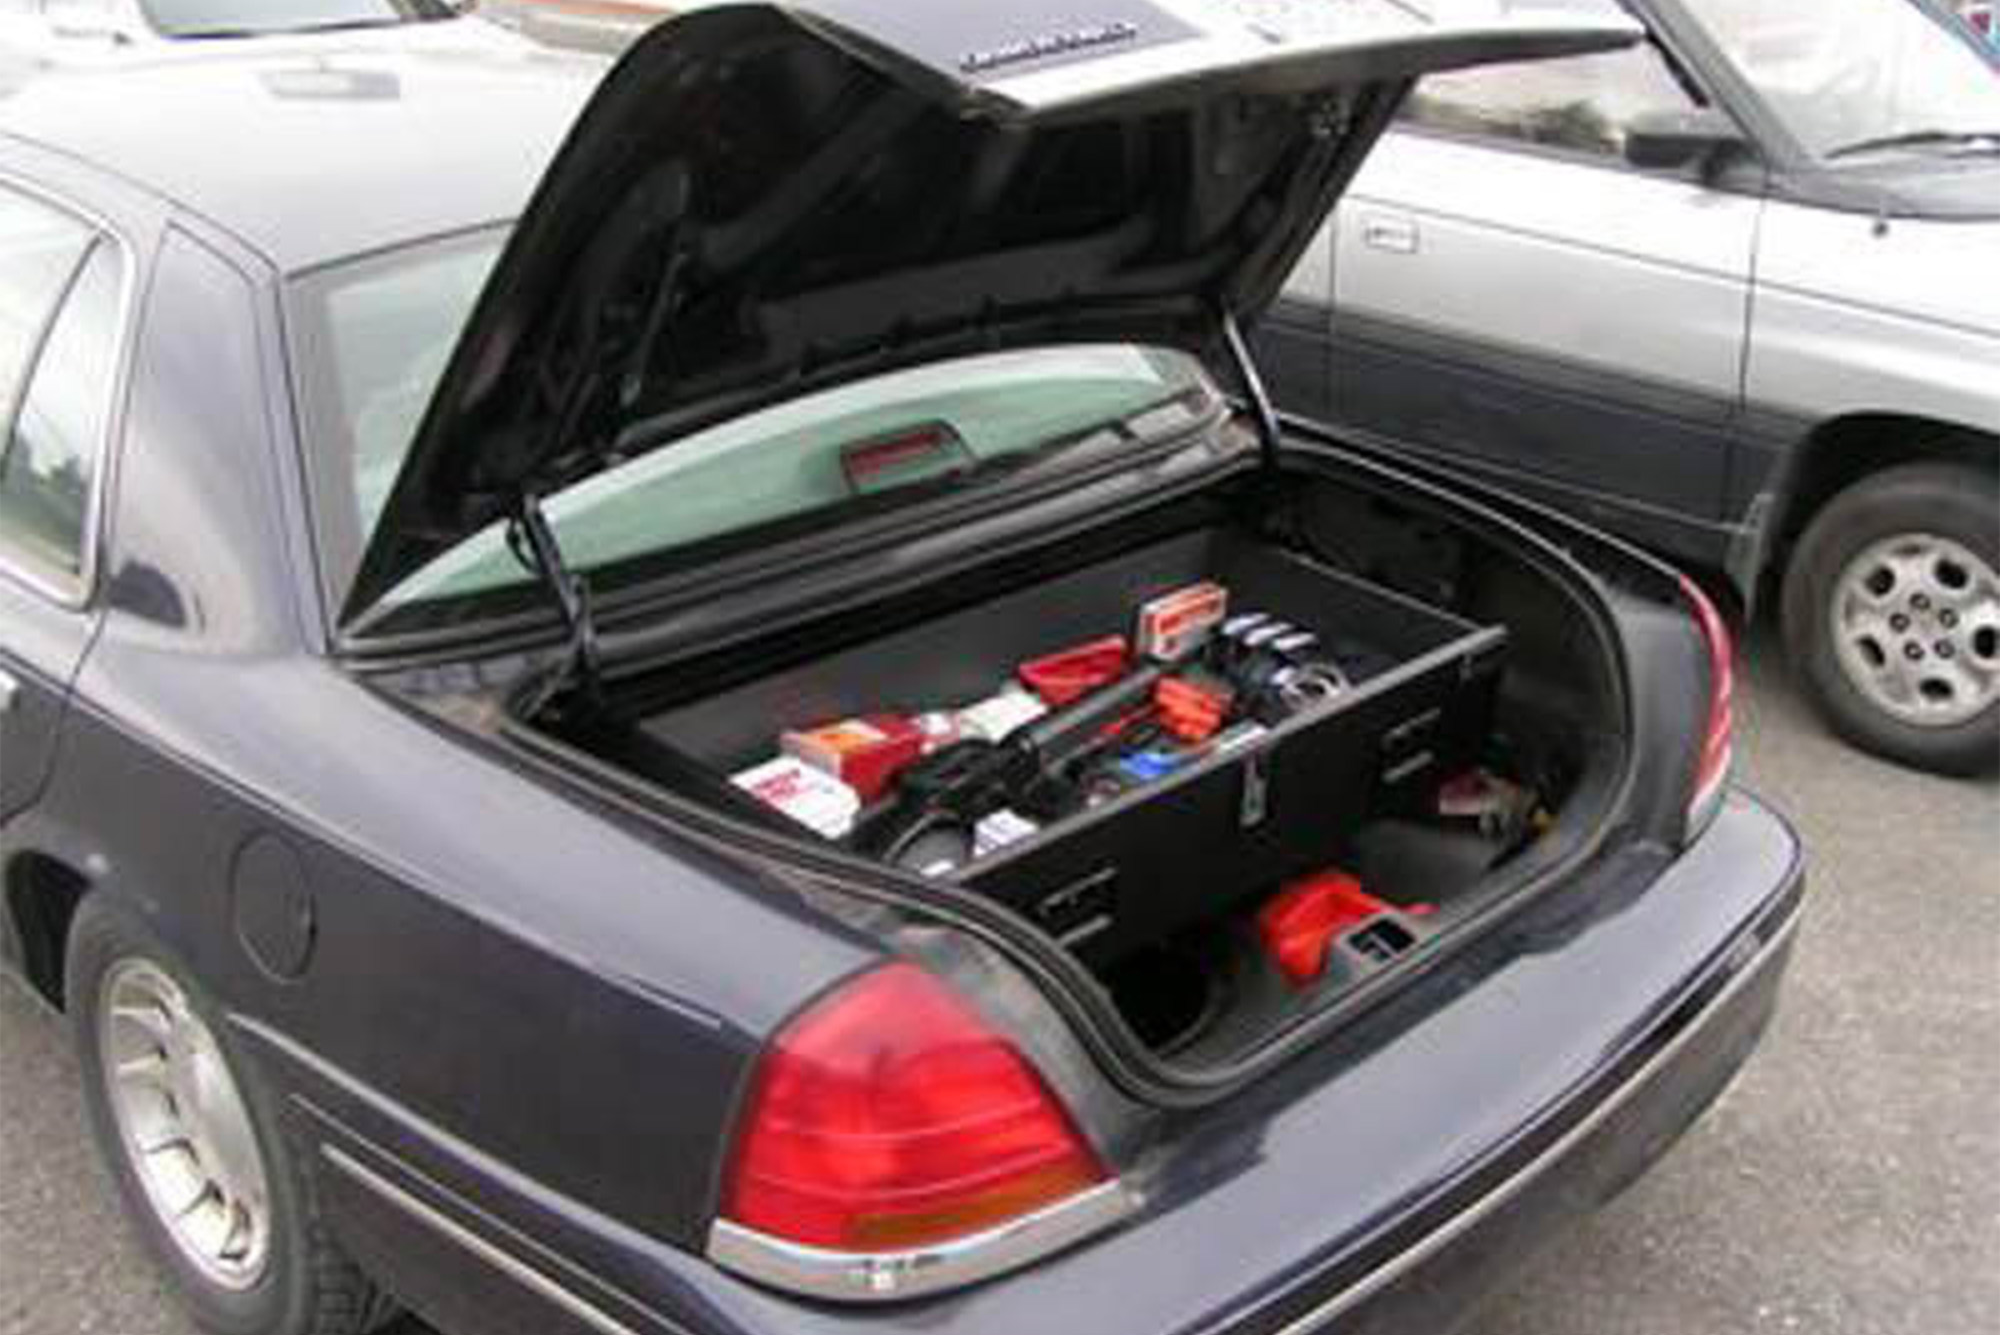 A navy Ford Crown Victoria police vehicle with a TruckVault in the trunk.